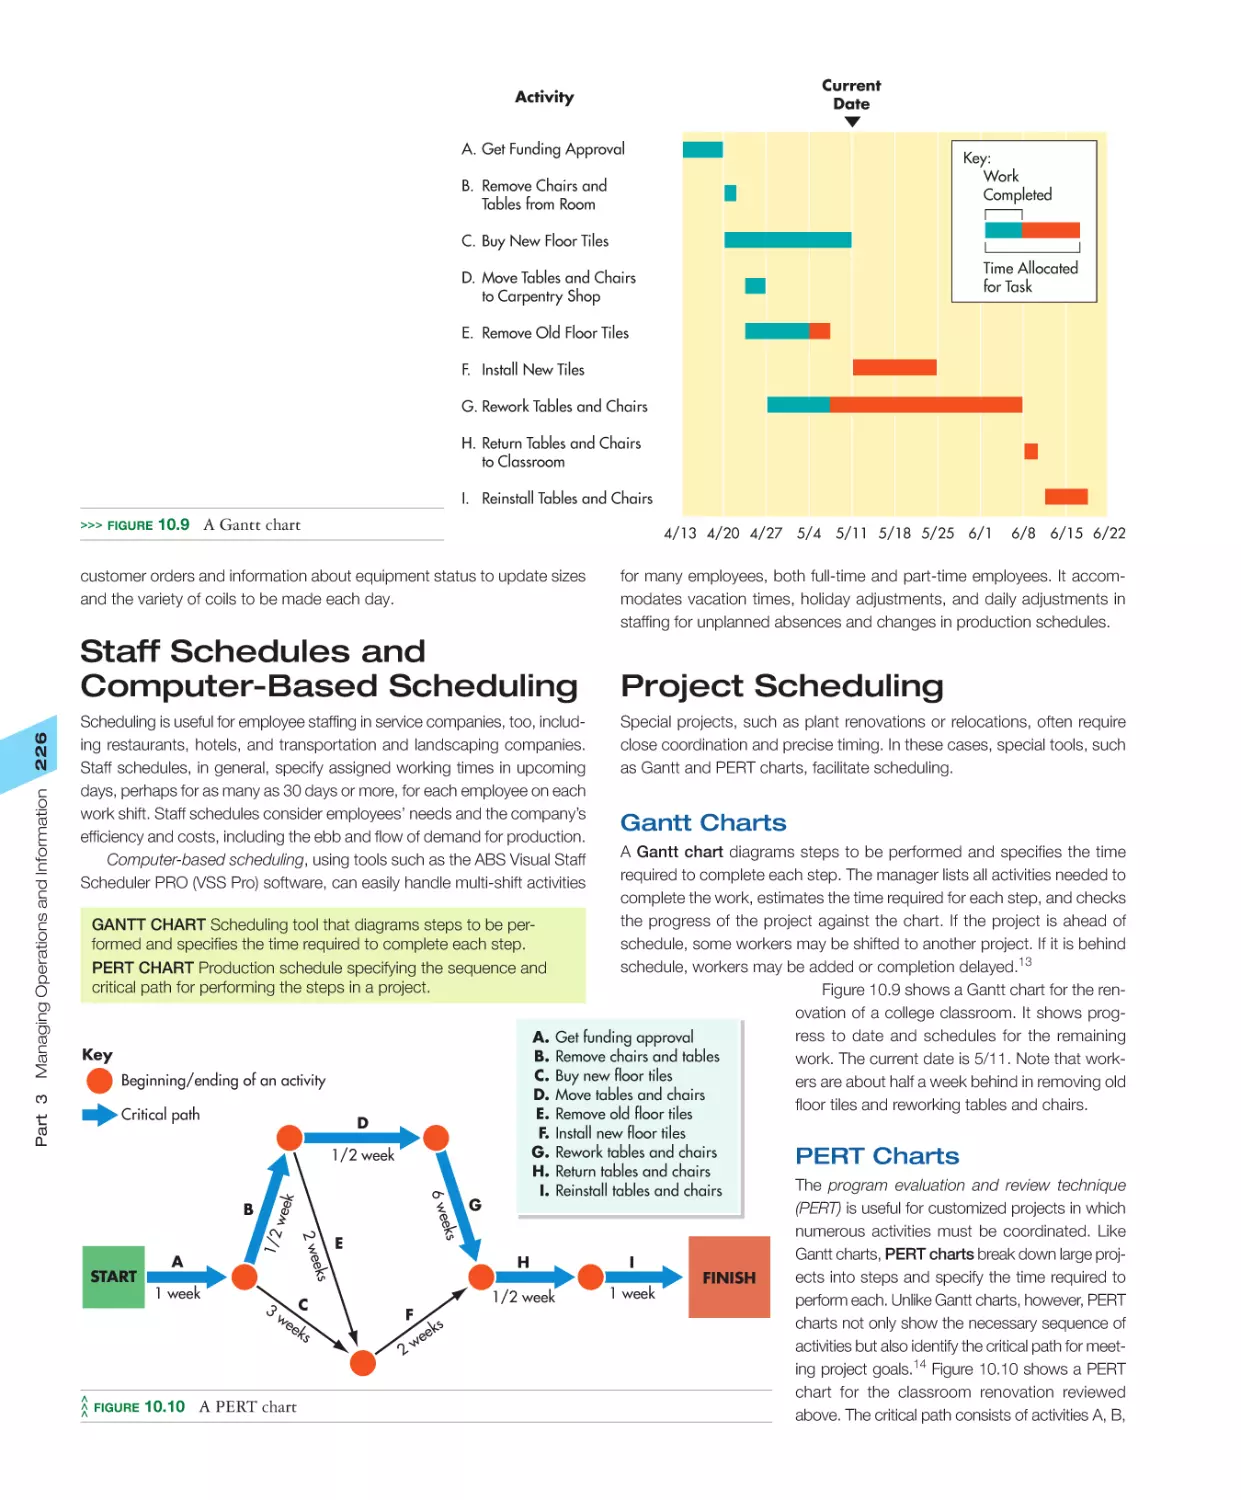 Staff Schedules and Computer‐Based Scheduling
Project Scheduling